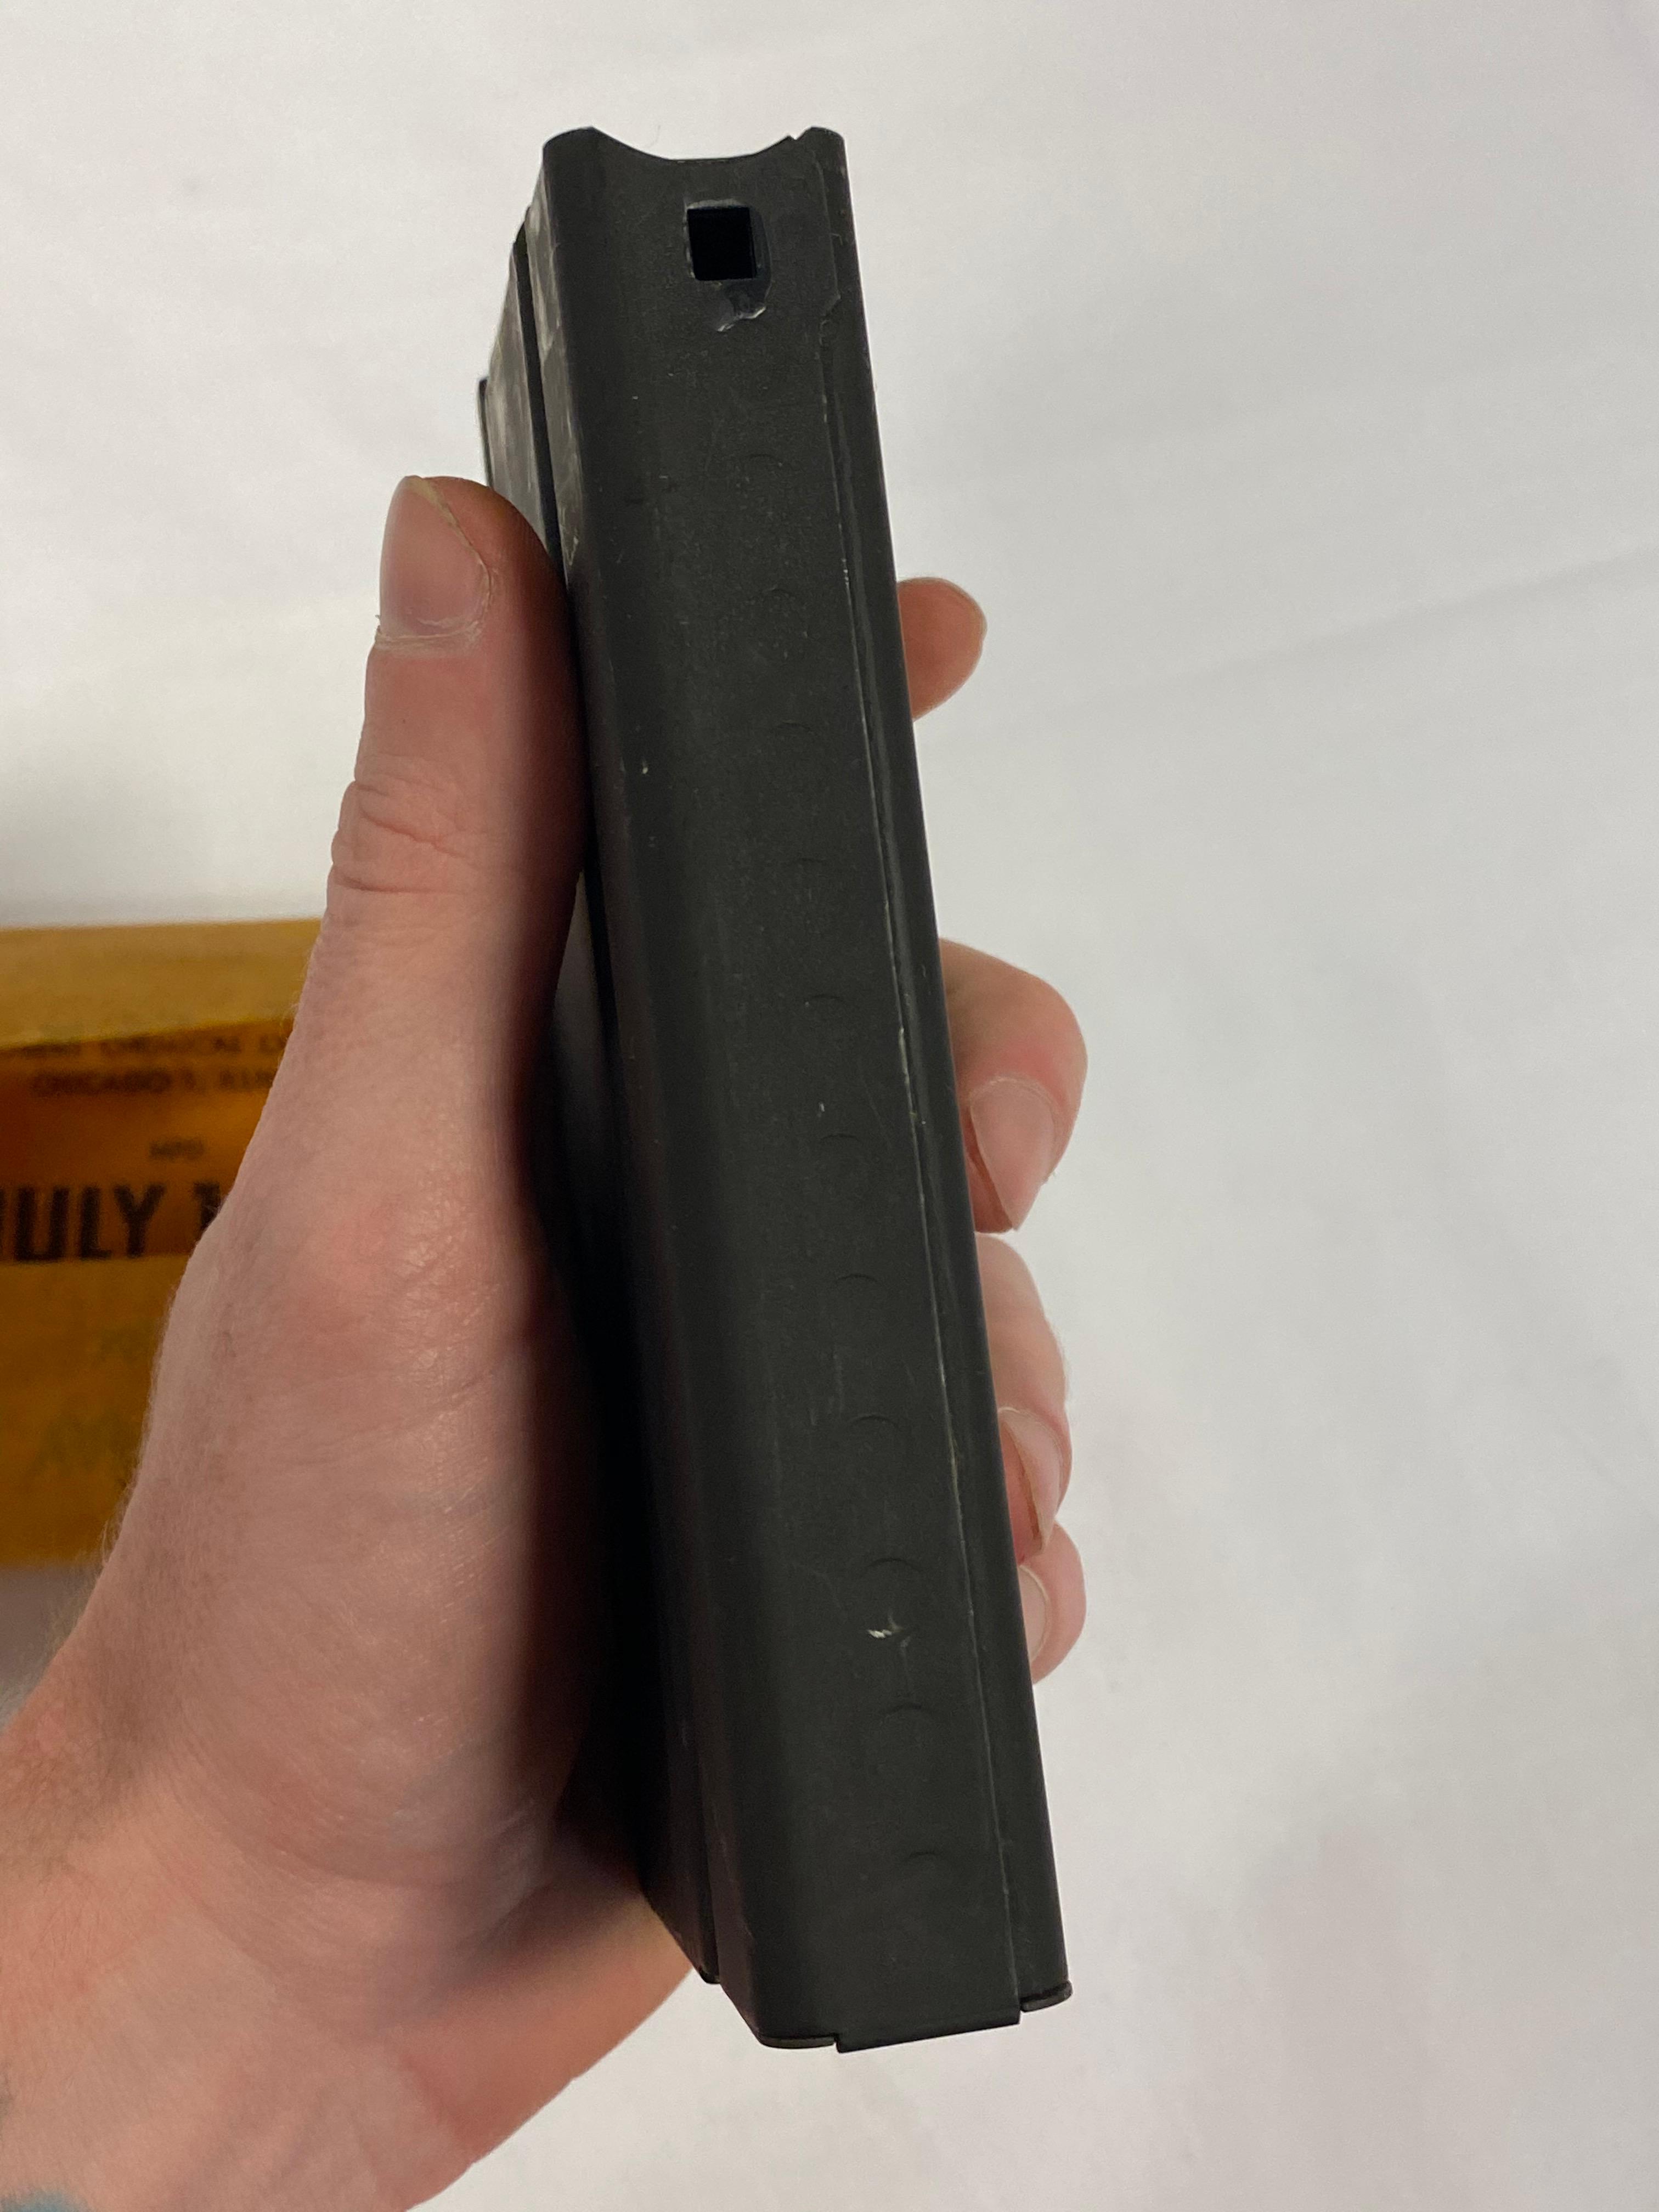 Springfield Armory M14/M1A 7.62x51mm Magazine in Original Wax Packaging